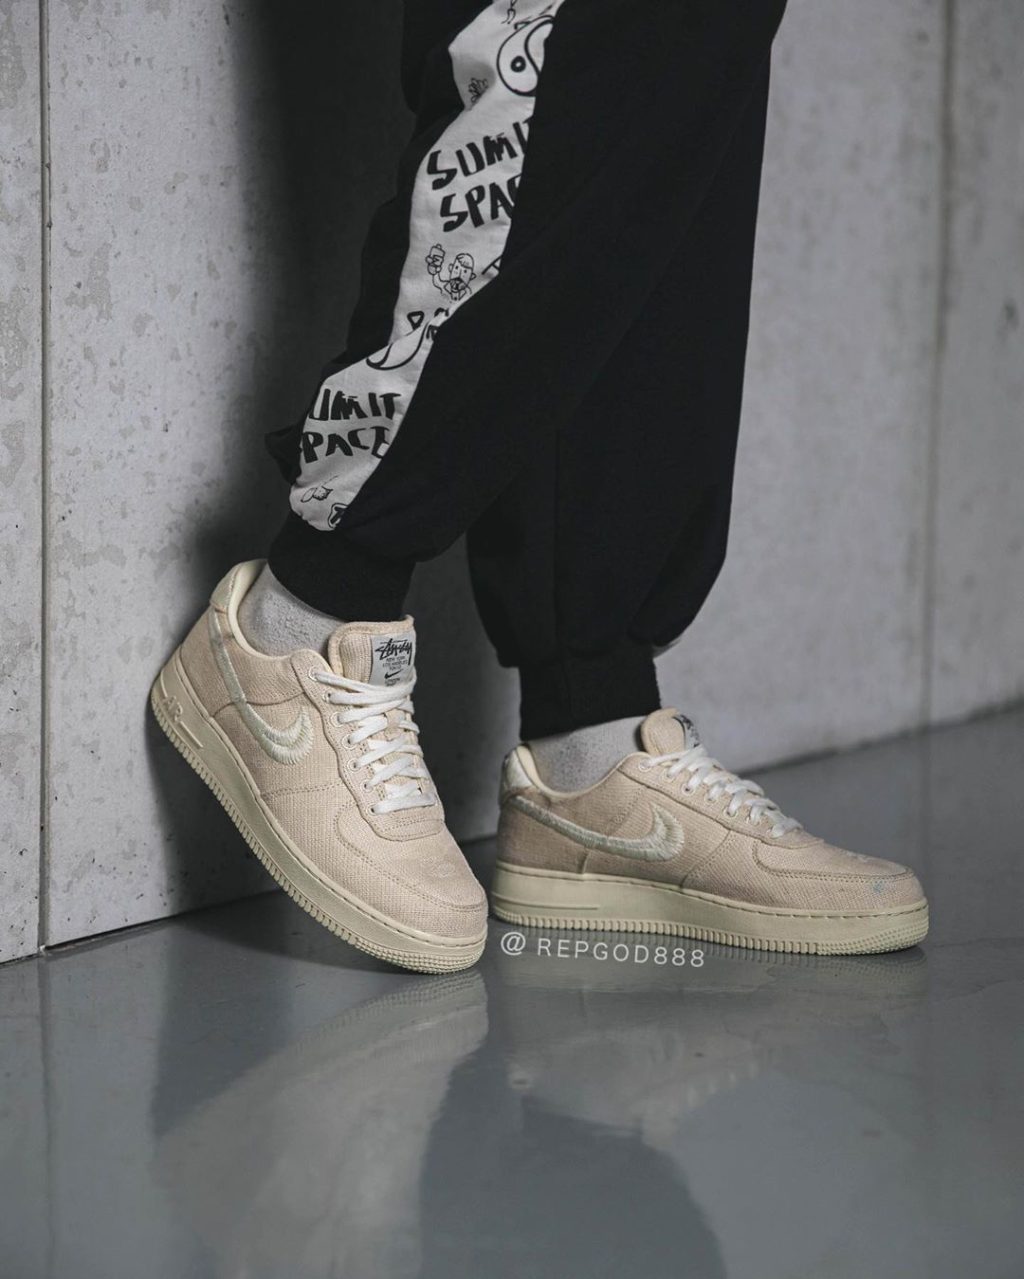 stussy-nike-air-force-1-low-fossil-stone-cz9084-001-release-2020-winter